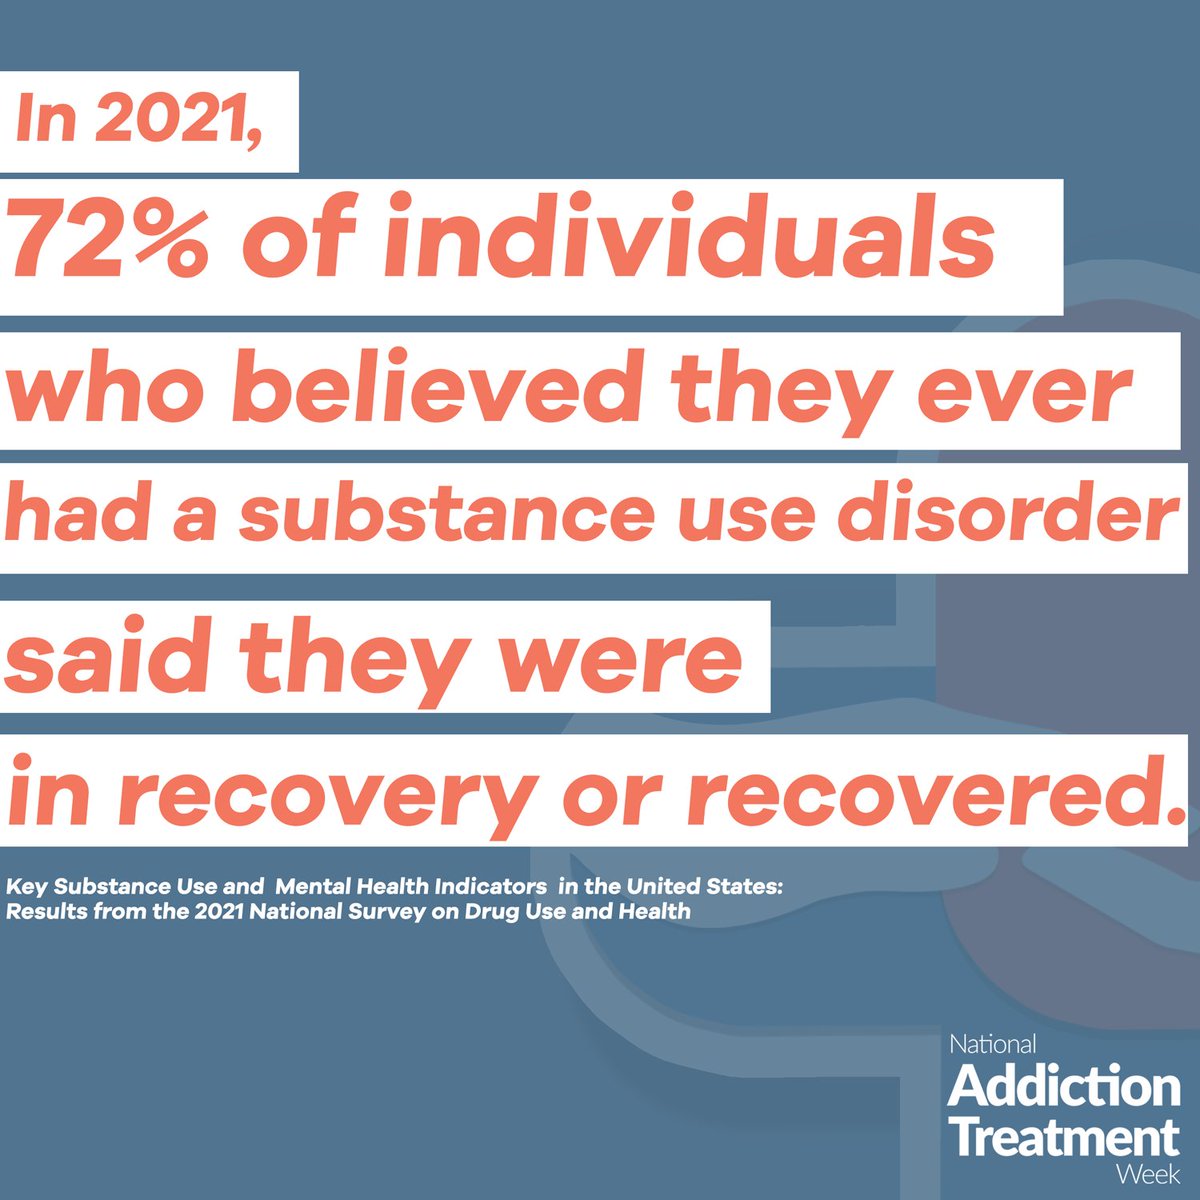 Treatment is available and recovery is possible. #TreatAddictionSaveLives

#TreatmentWeek #EndStigma #NATW #AddictionMedicine #AddictionTreatment #NationalAddictionTreatmentWeek #ASAM